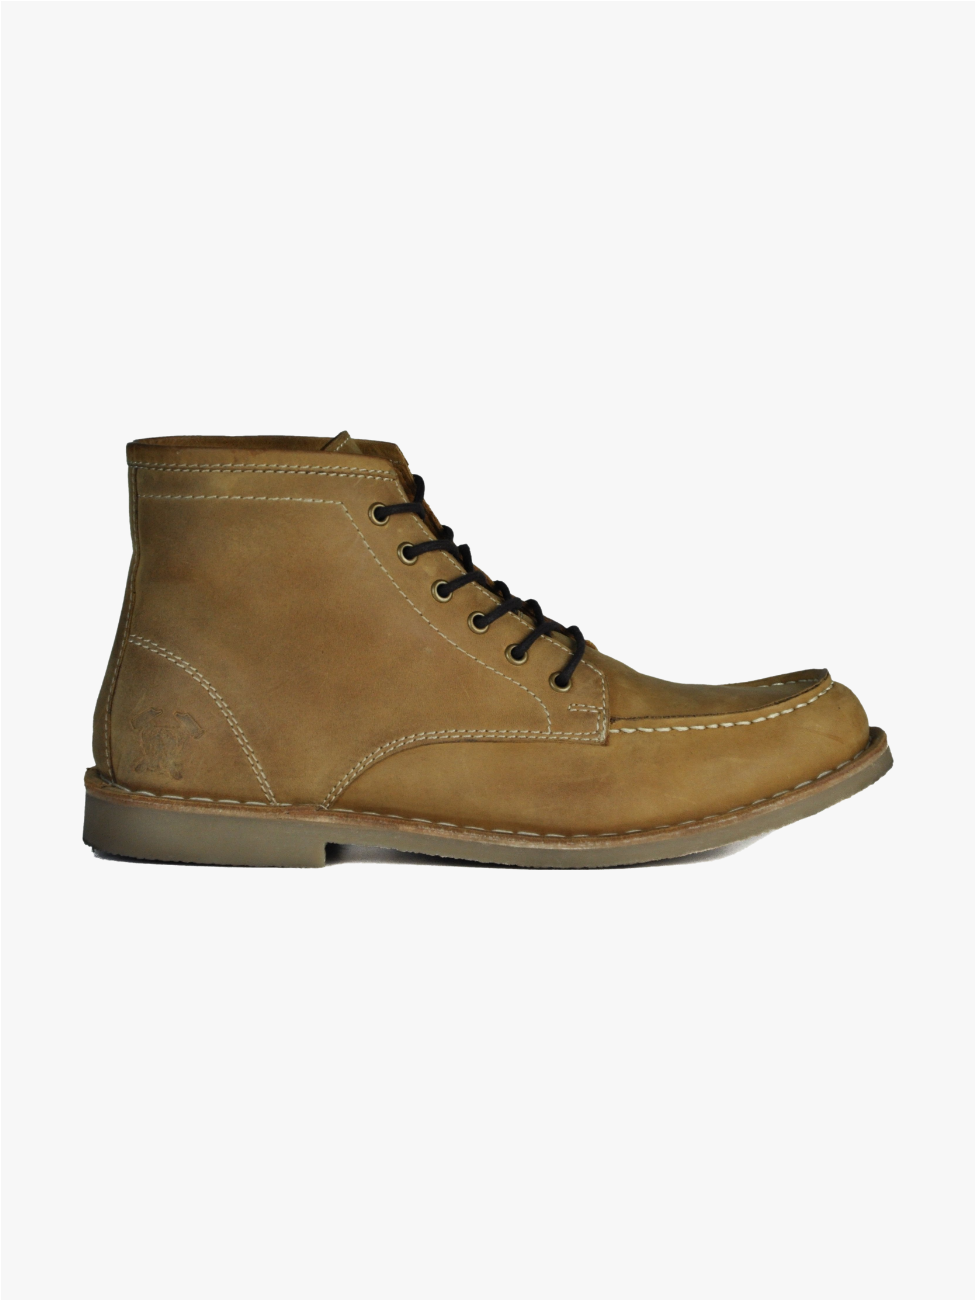 The Cooper Crazy Horse Tan Leather Boots